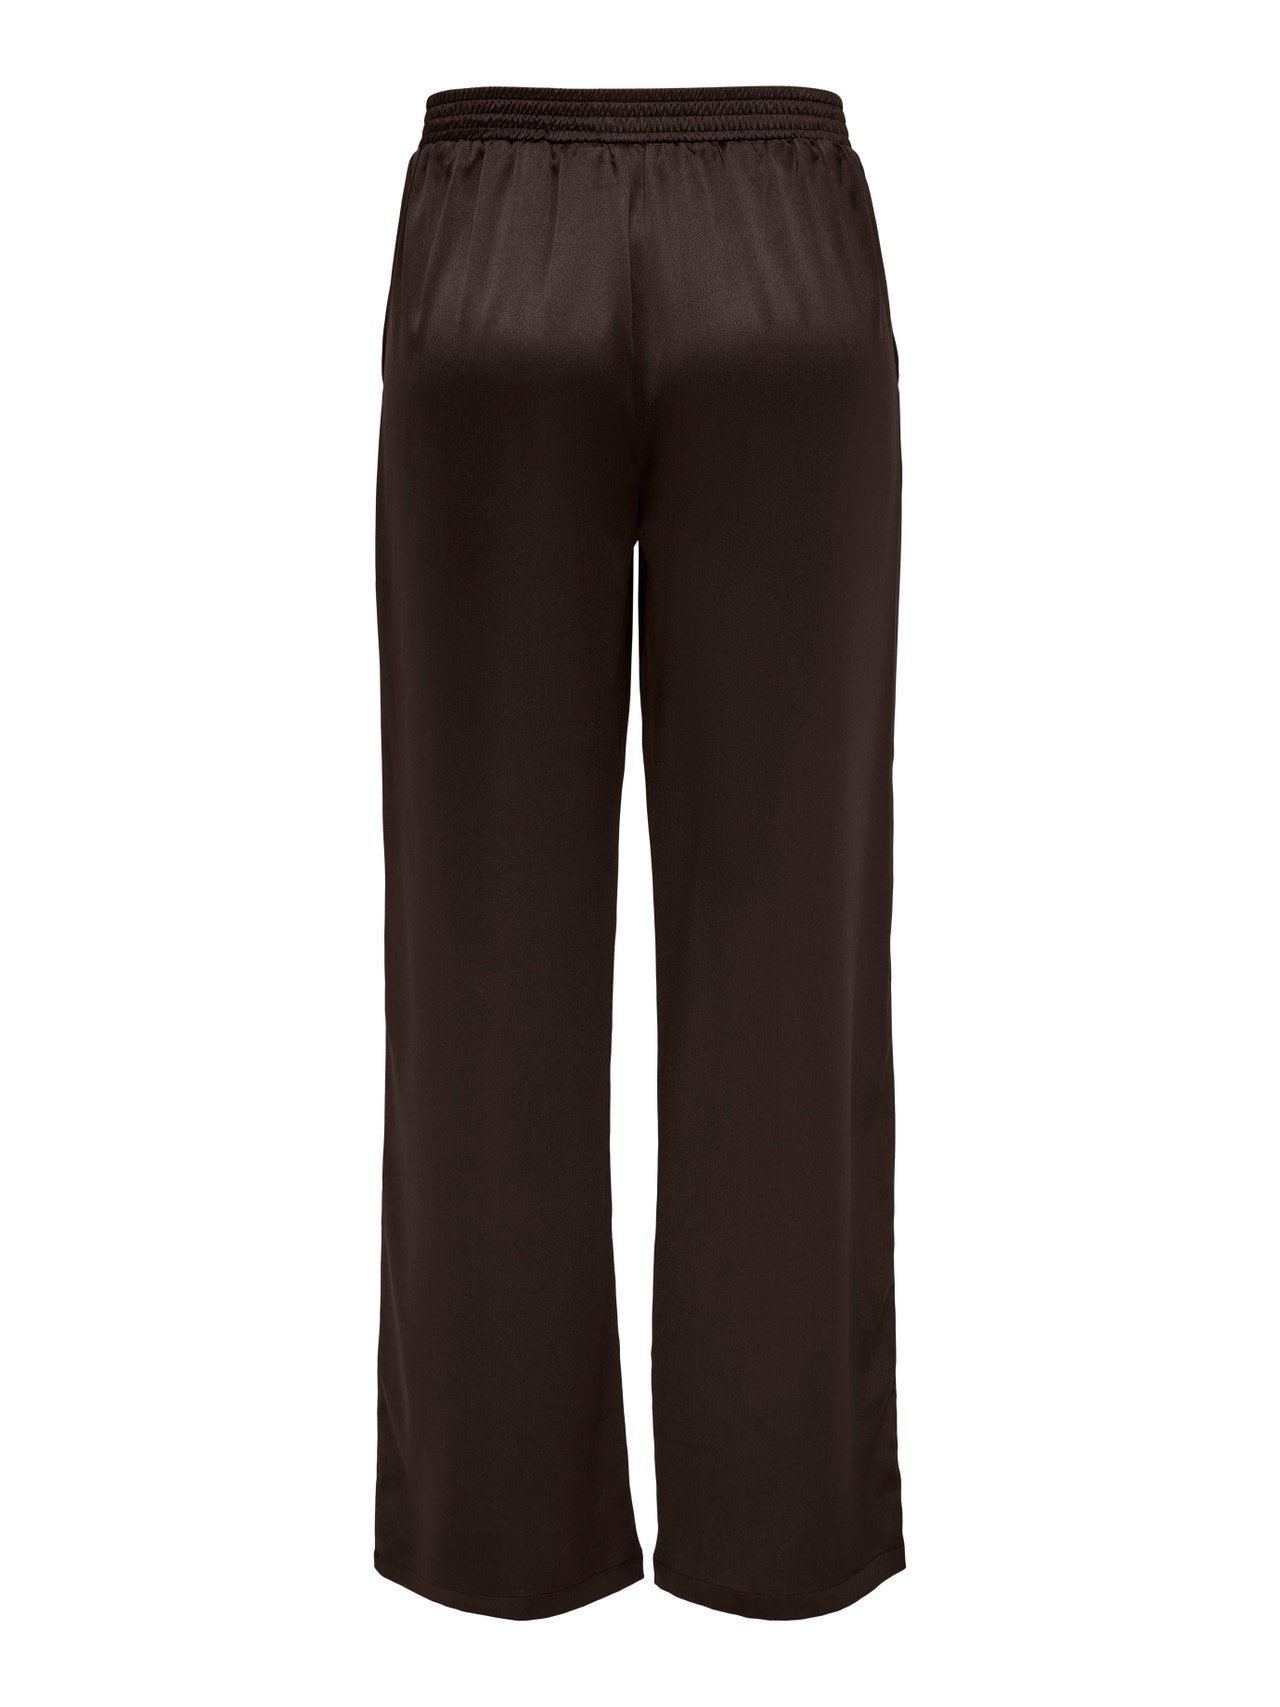 ONLY Satin Trousers -Delicioso - 15280101